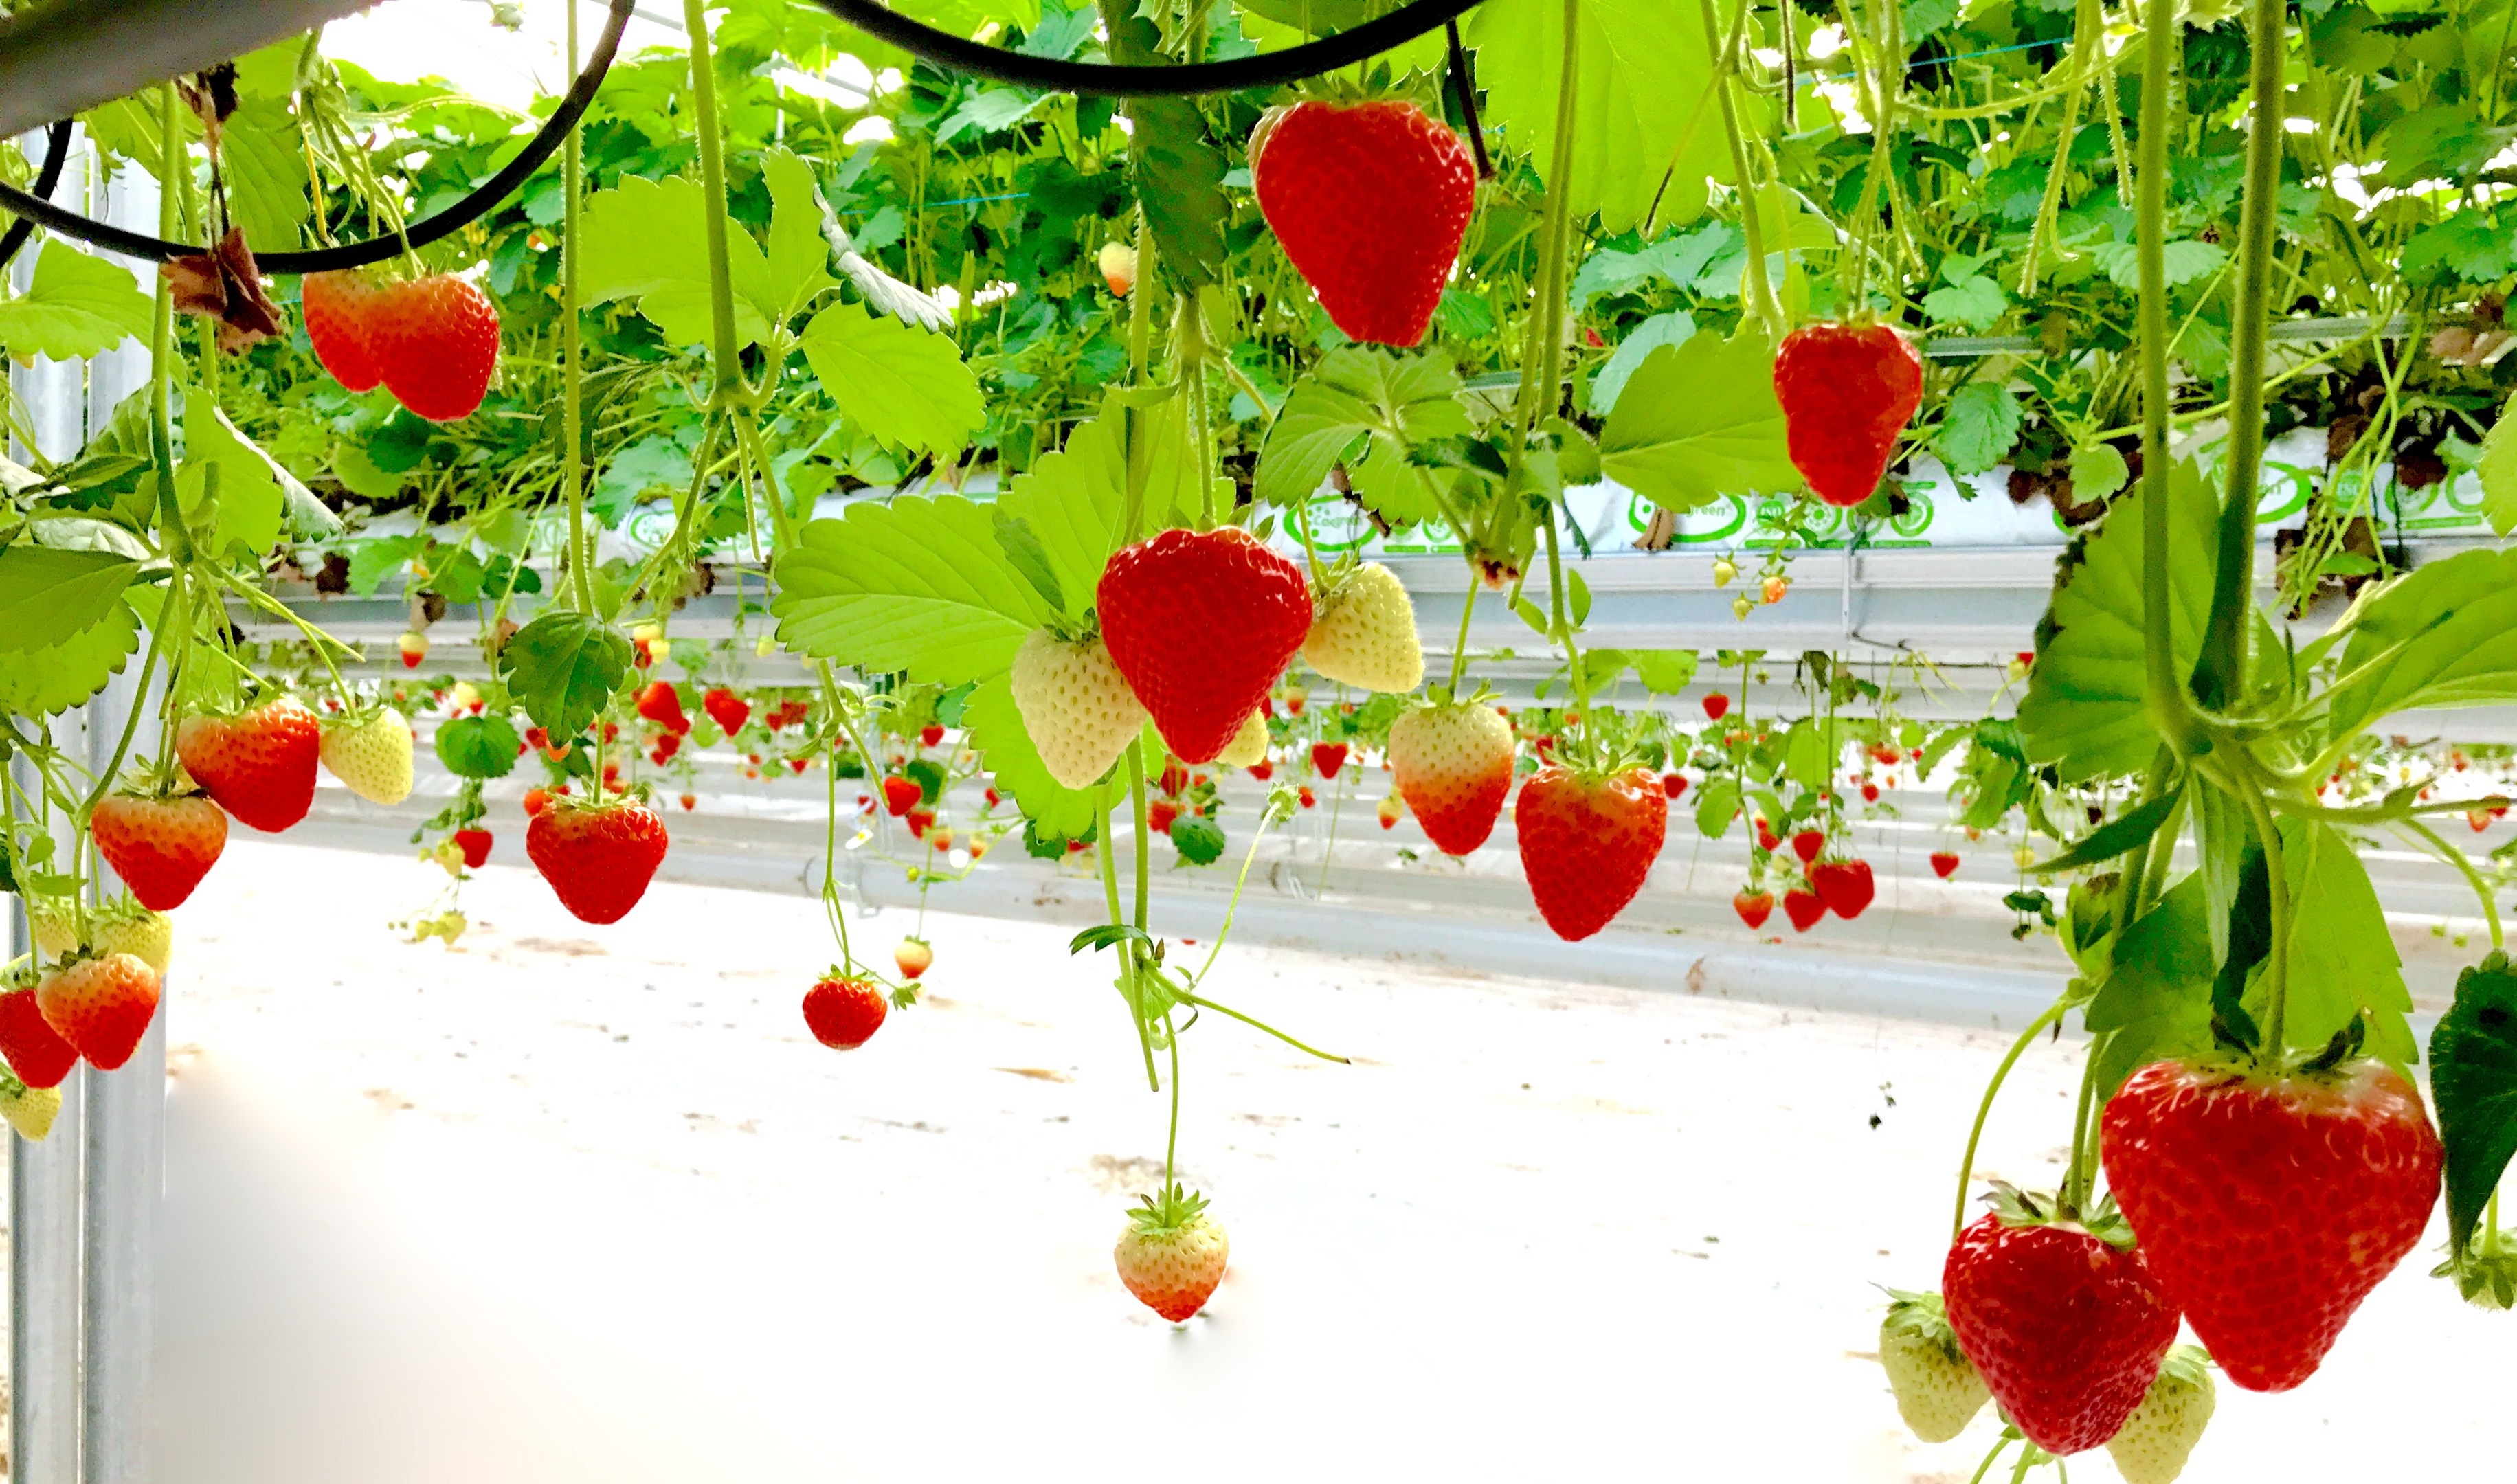 Abbey Fruit enjoys a productive strawberry harvest until late December with the help of innovative greenhouses.